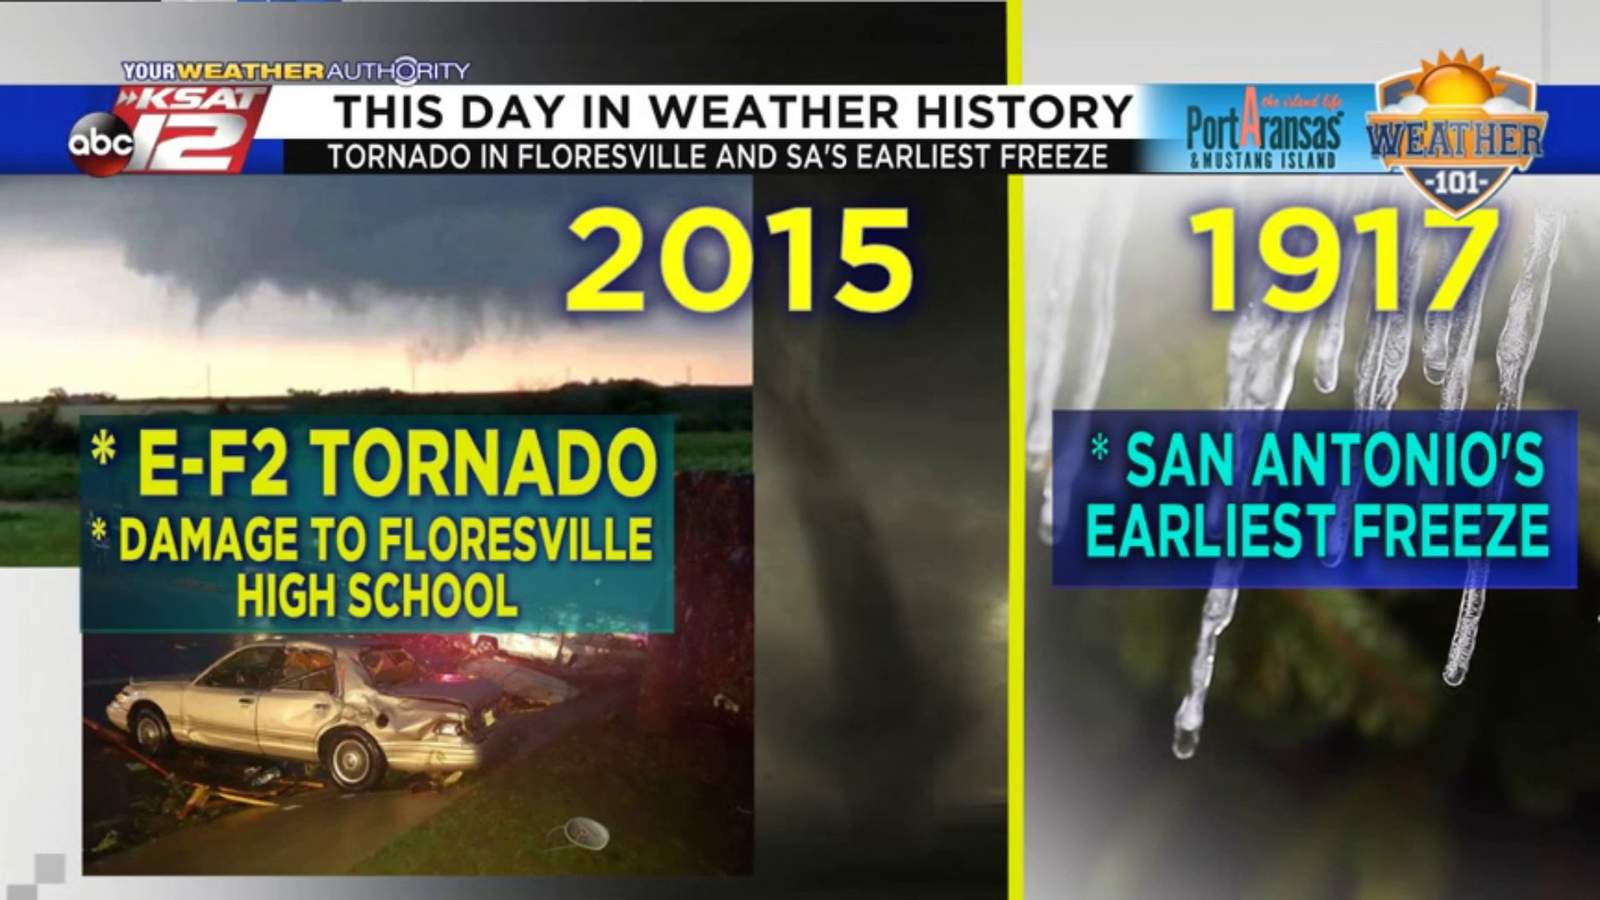 This Day in Weather History: October 30th